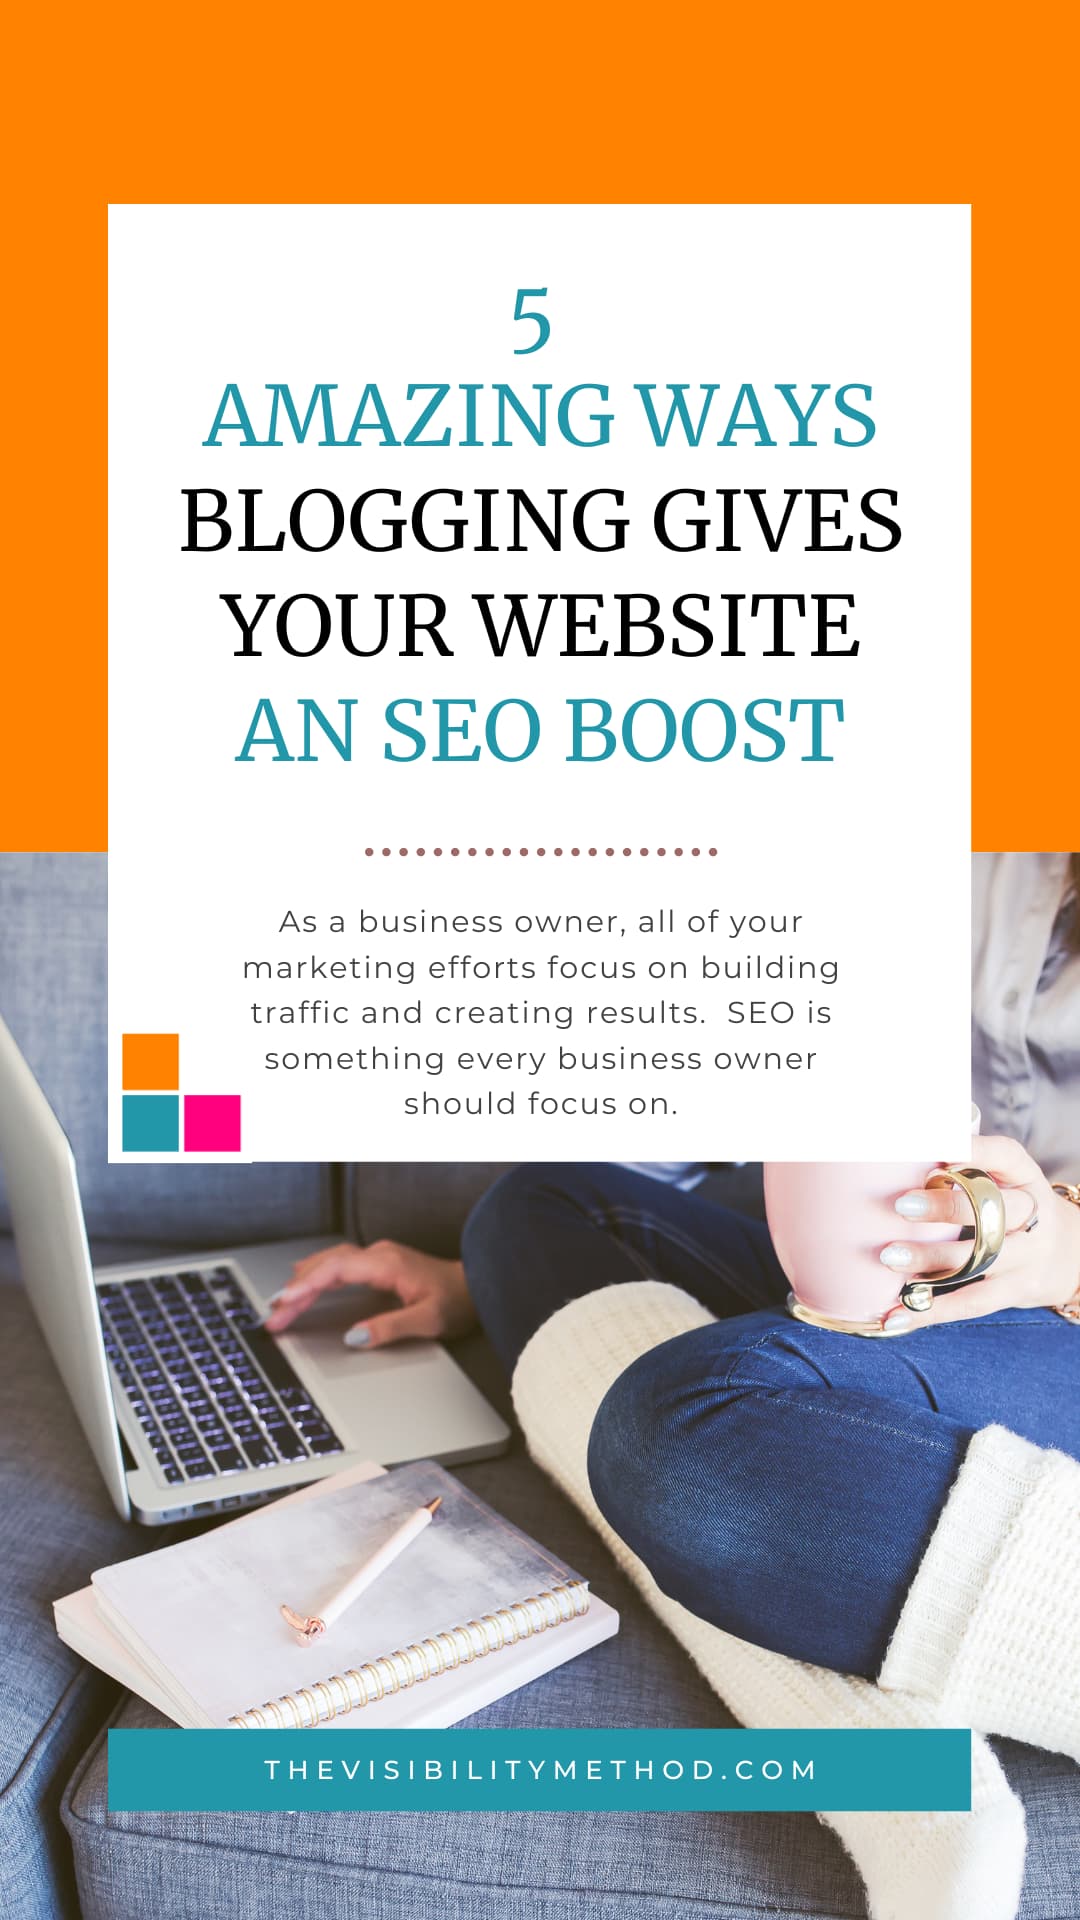 5 Amazing Ways Blogging Gives Your Website an SEO Boost